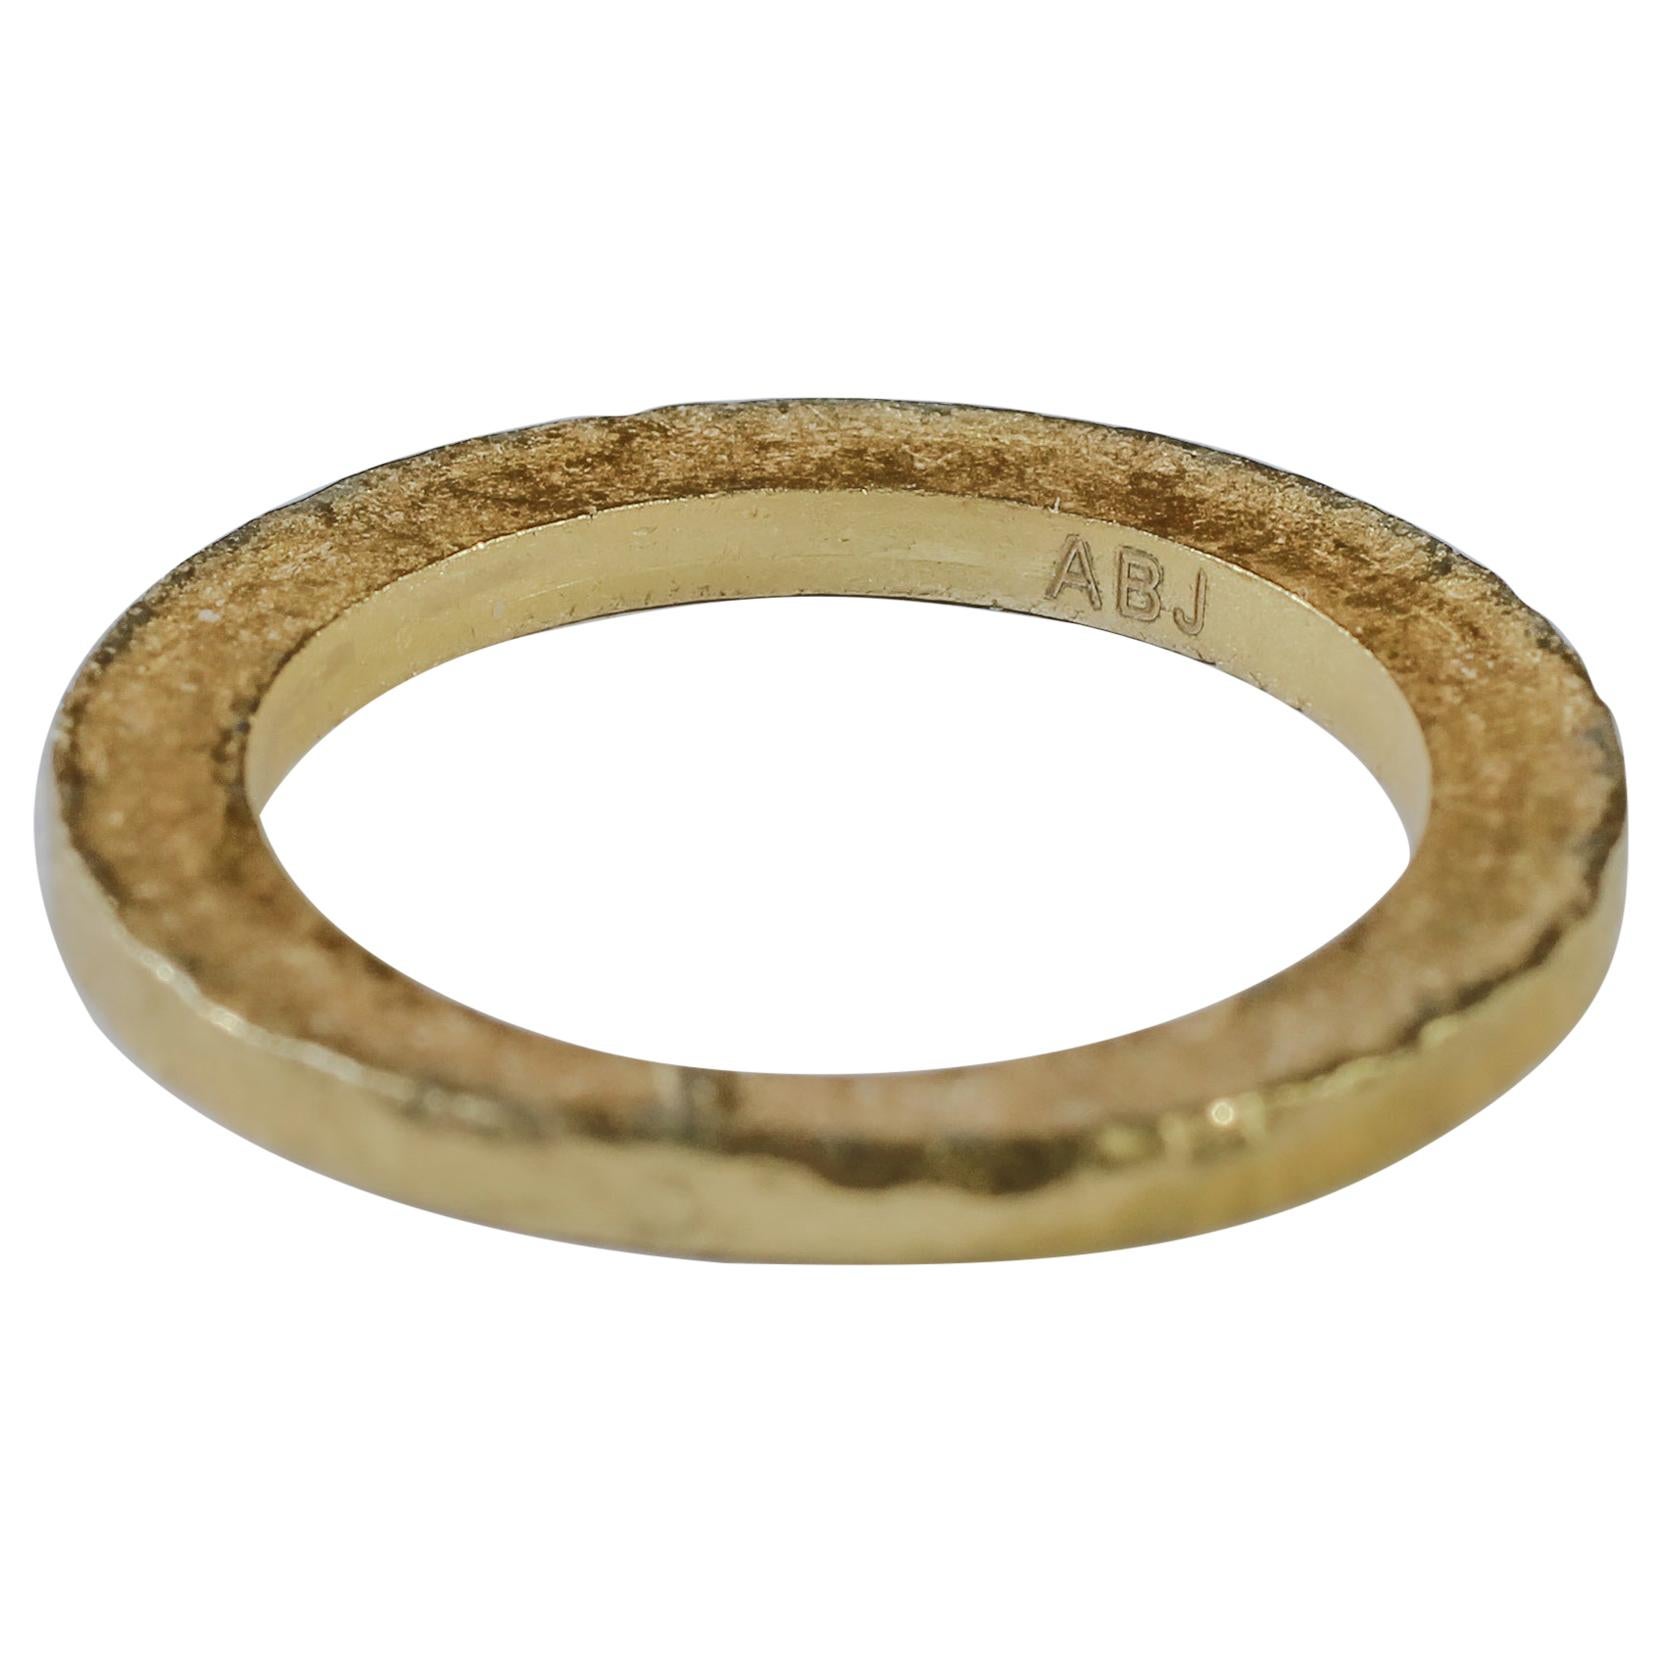 22K Recycled Gold Bridal Wedding Ring Alternative Stacking Fashion Design For Sale